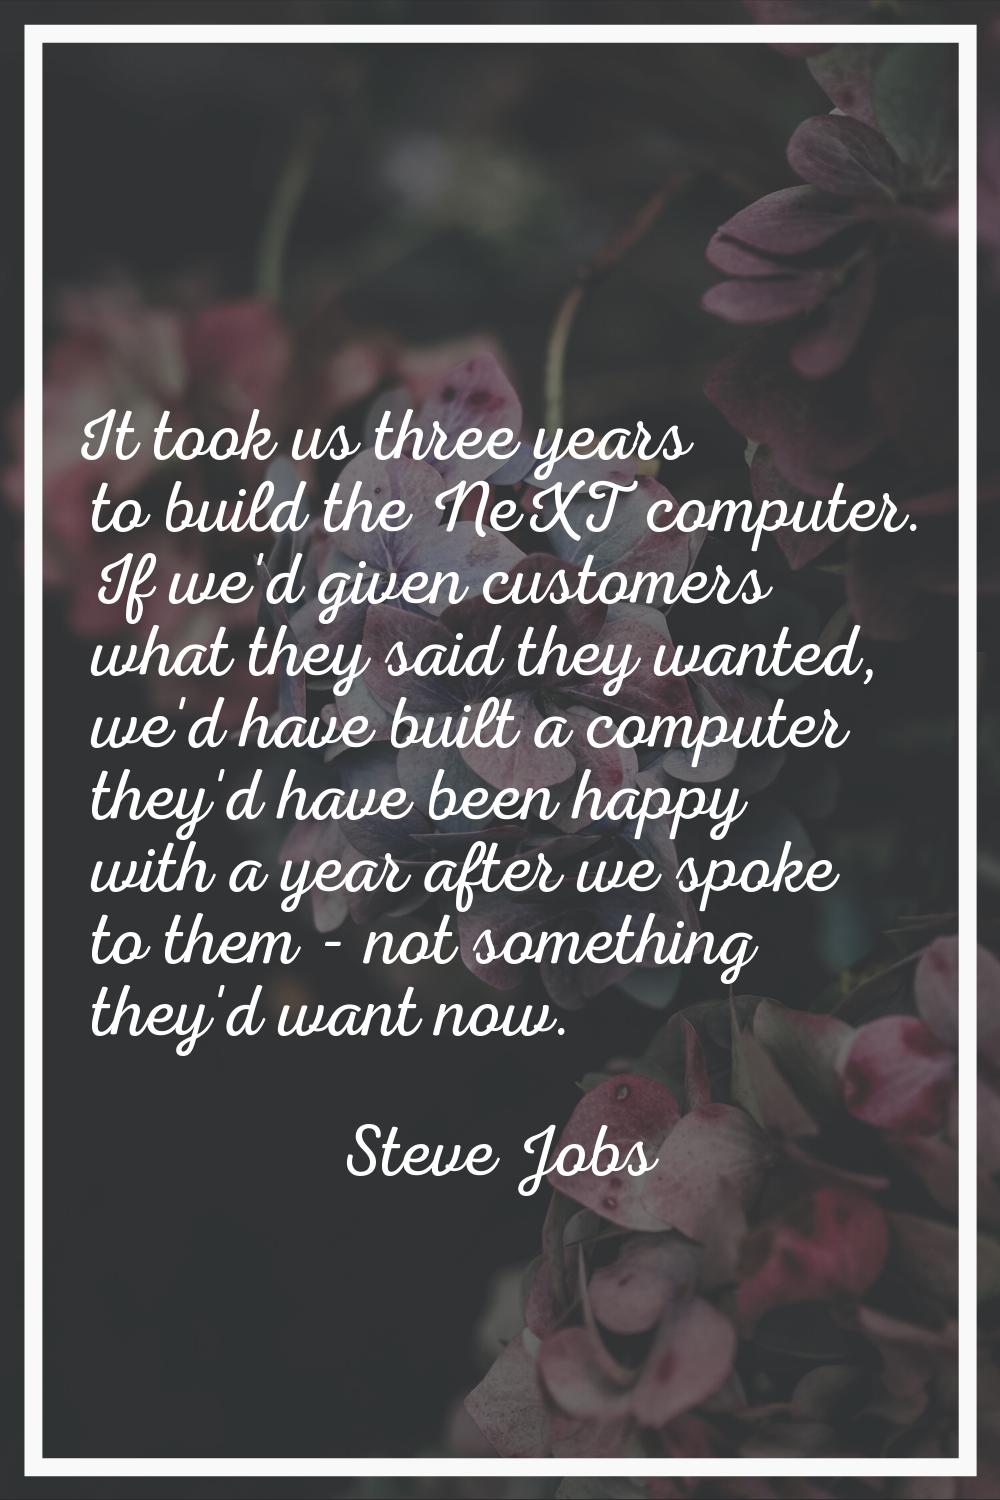 It took us three years to build the NeXT computer. If we'd given customers what they said they want